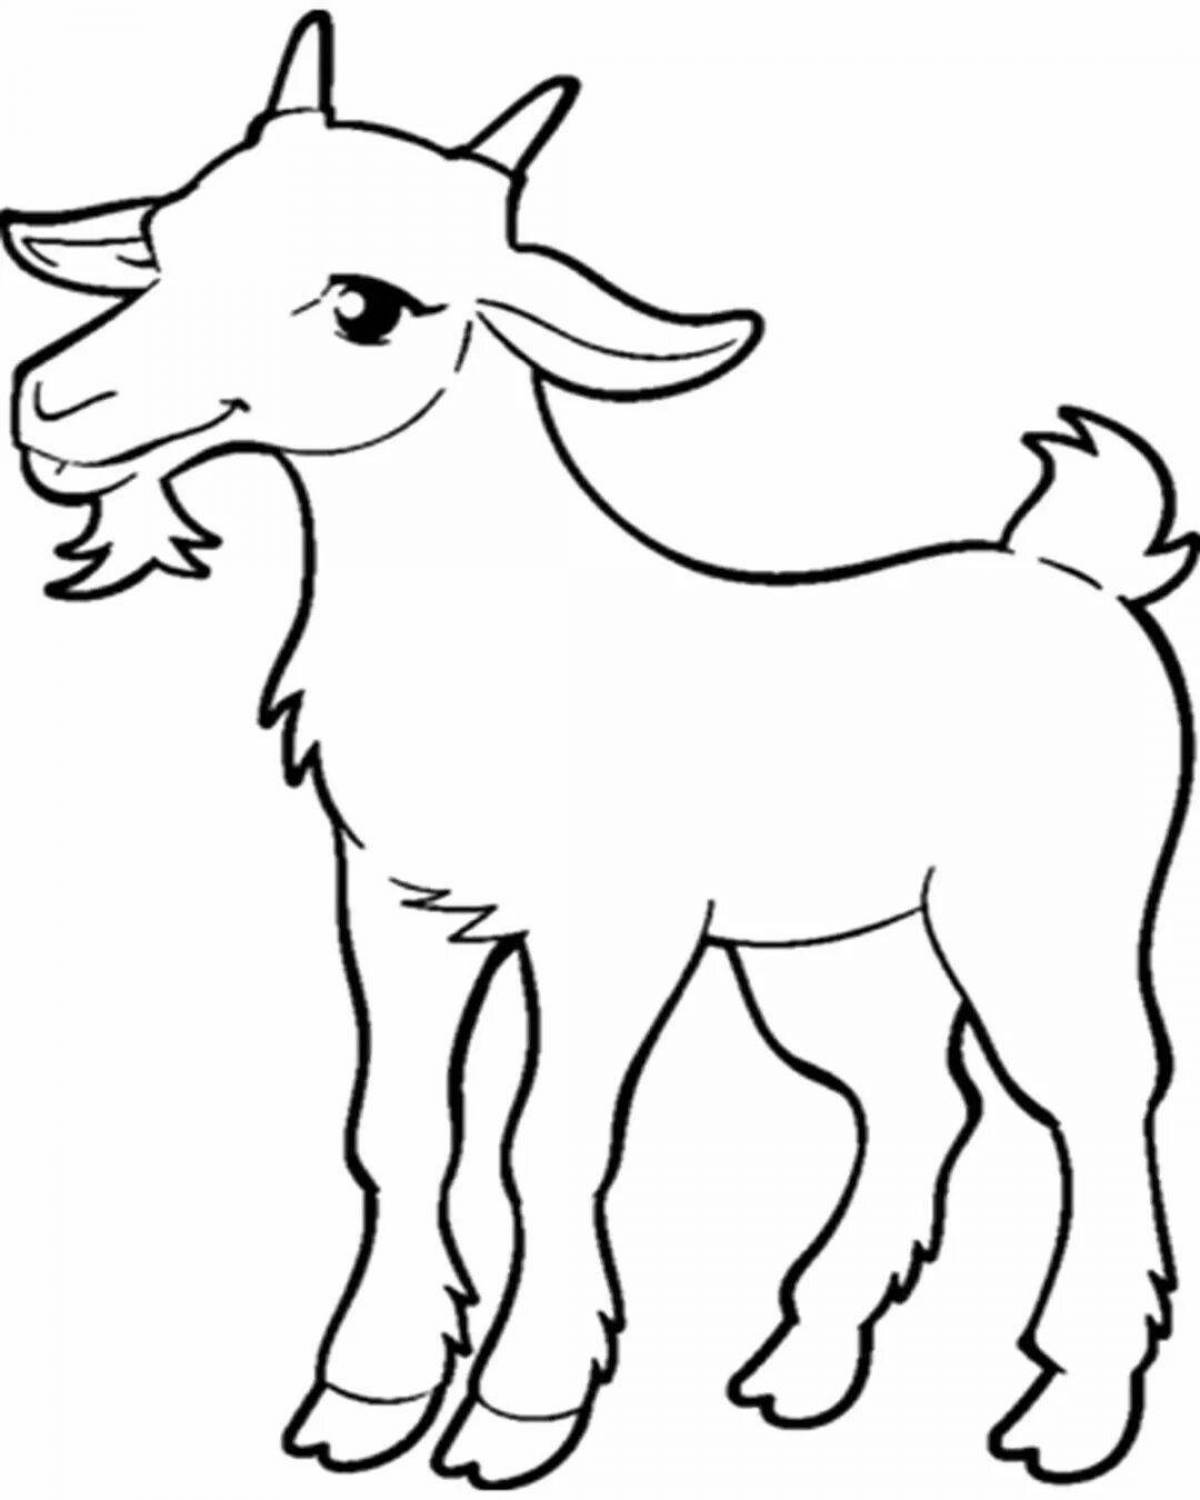 Animated goat coloring page for kids